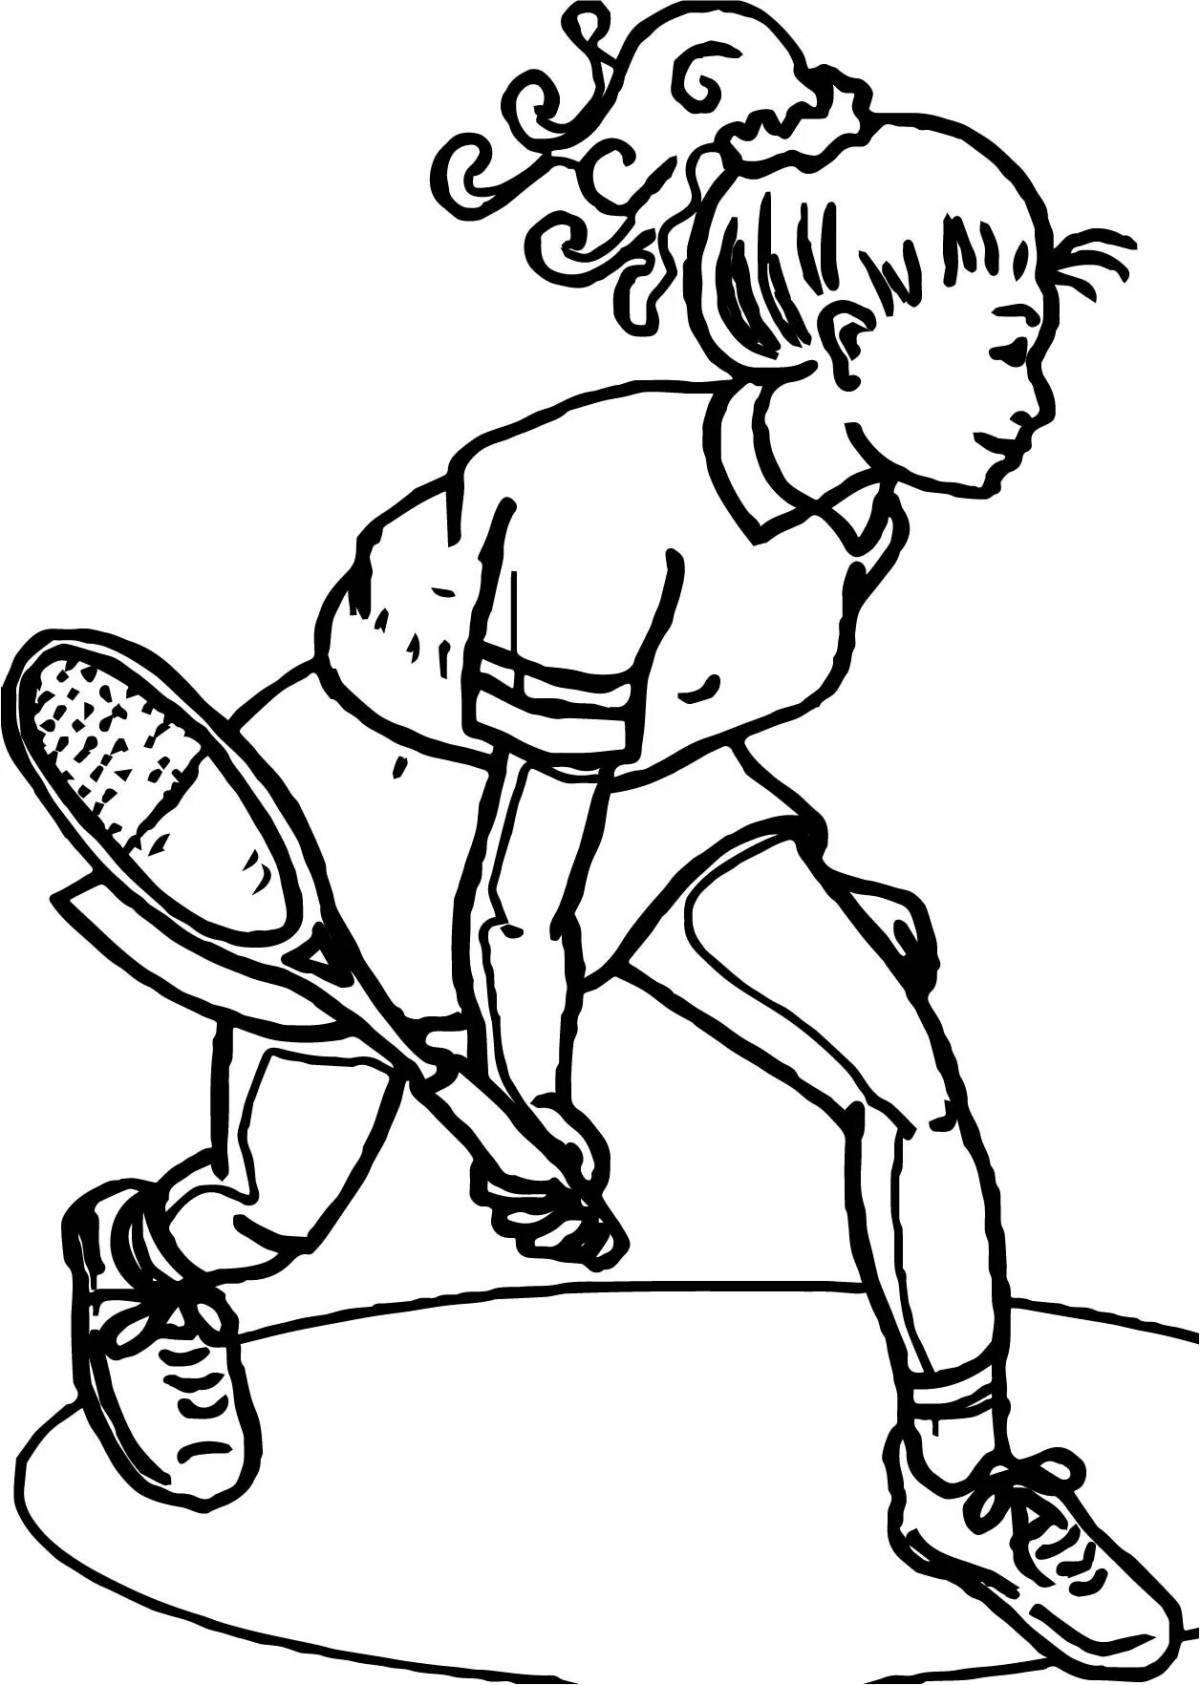 Wonderful sports coloring pages for kids